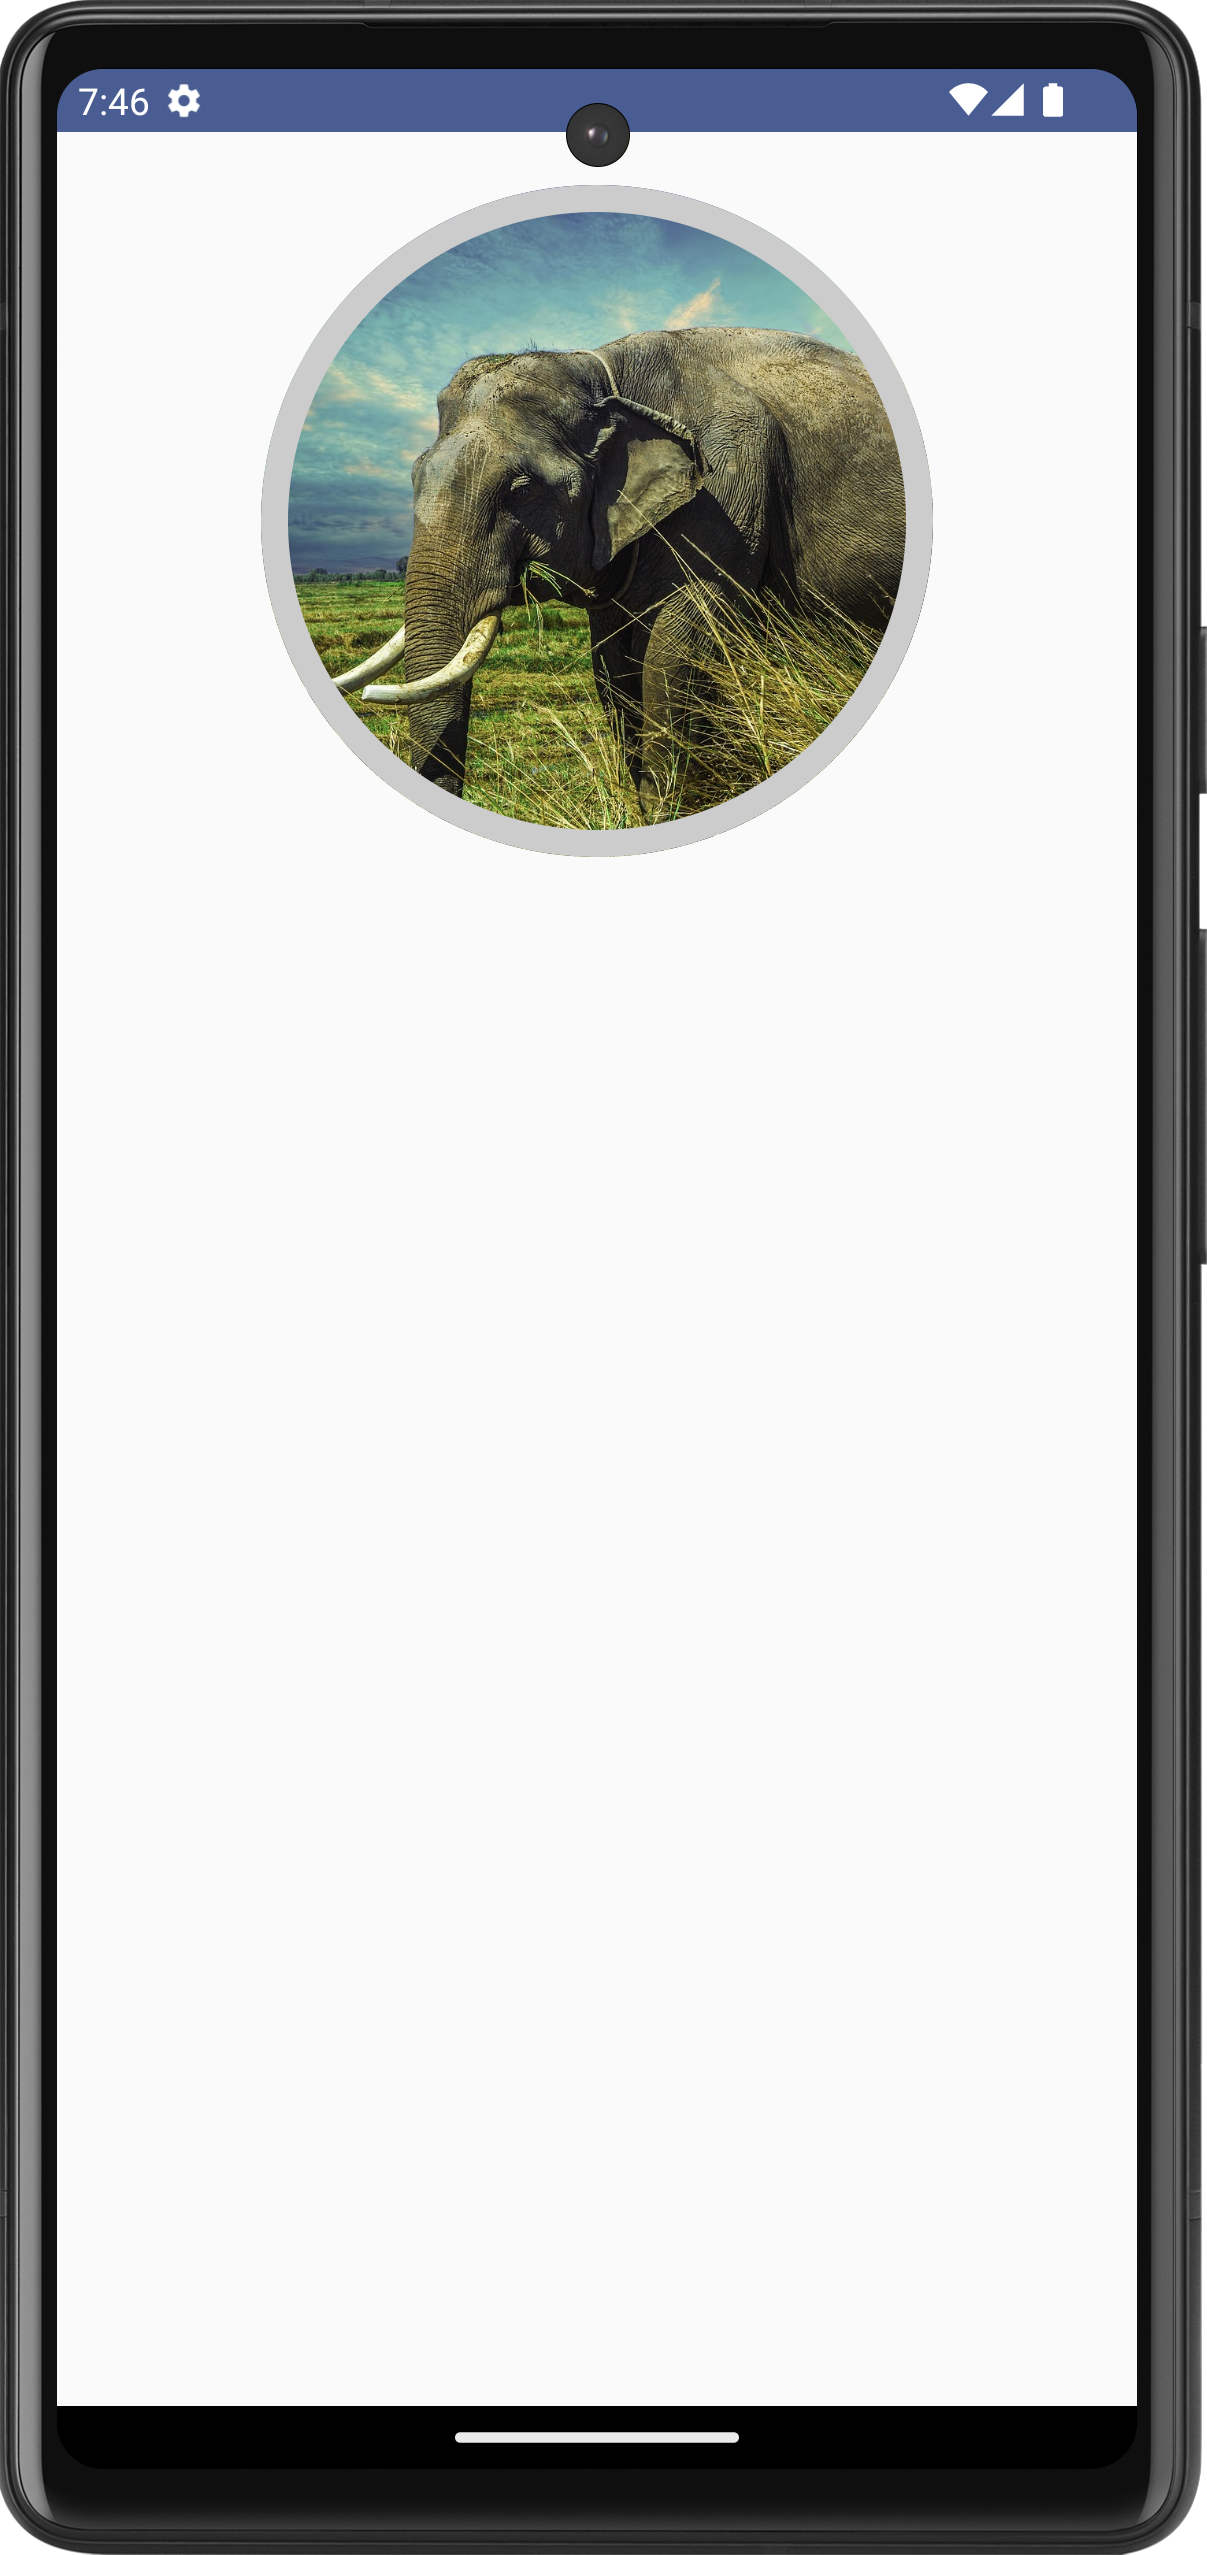 Android Jetpack Compose - Circular Image with Border